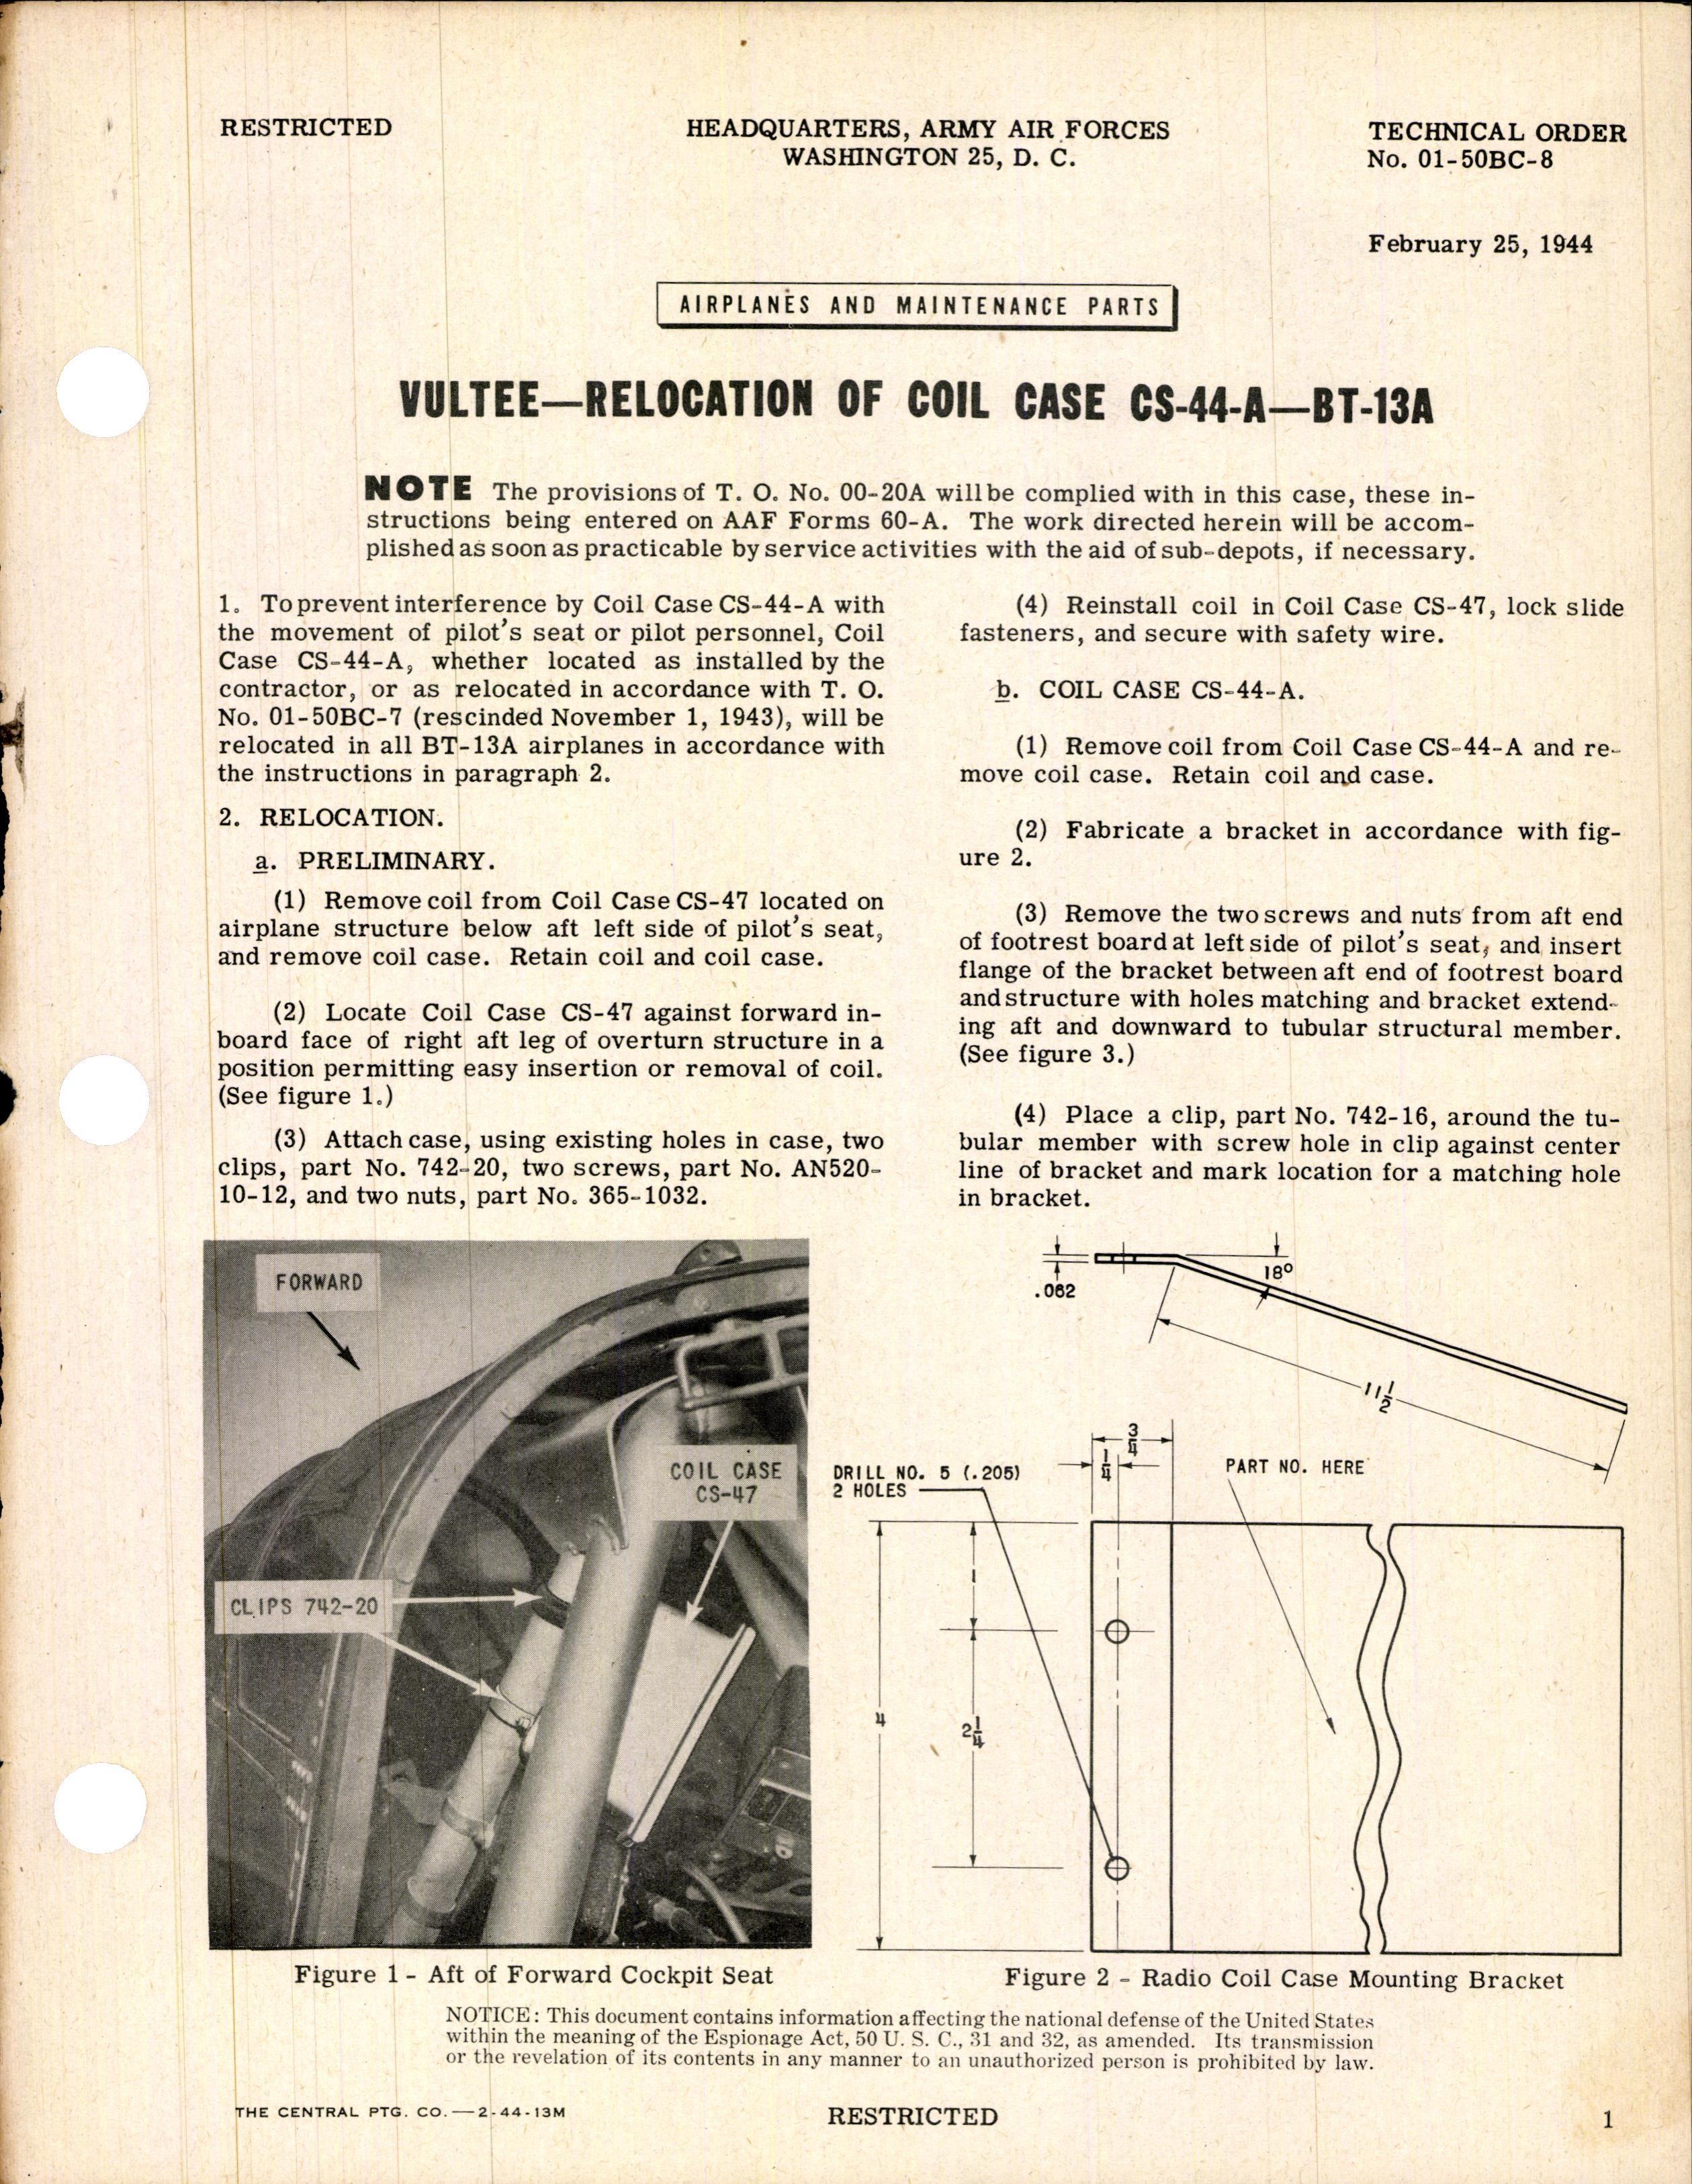 Sample page 1 from AirCorps Library document: Relocation of Coil Case CS-44-A-BT-13A